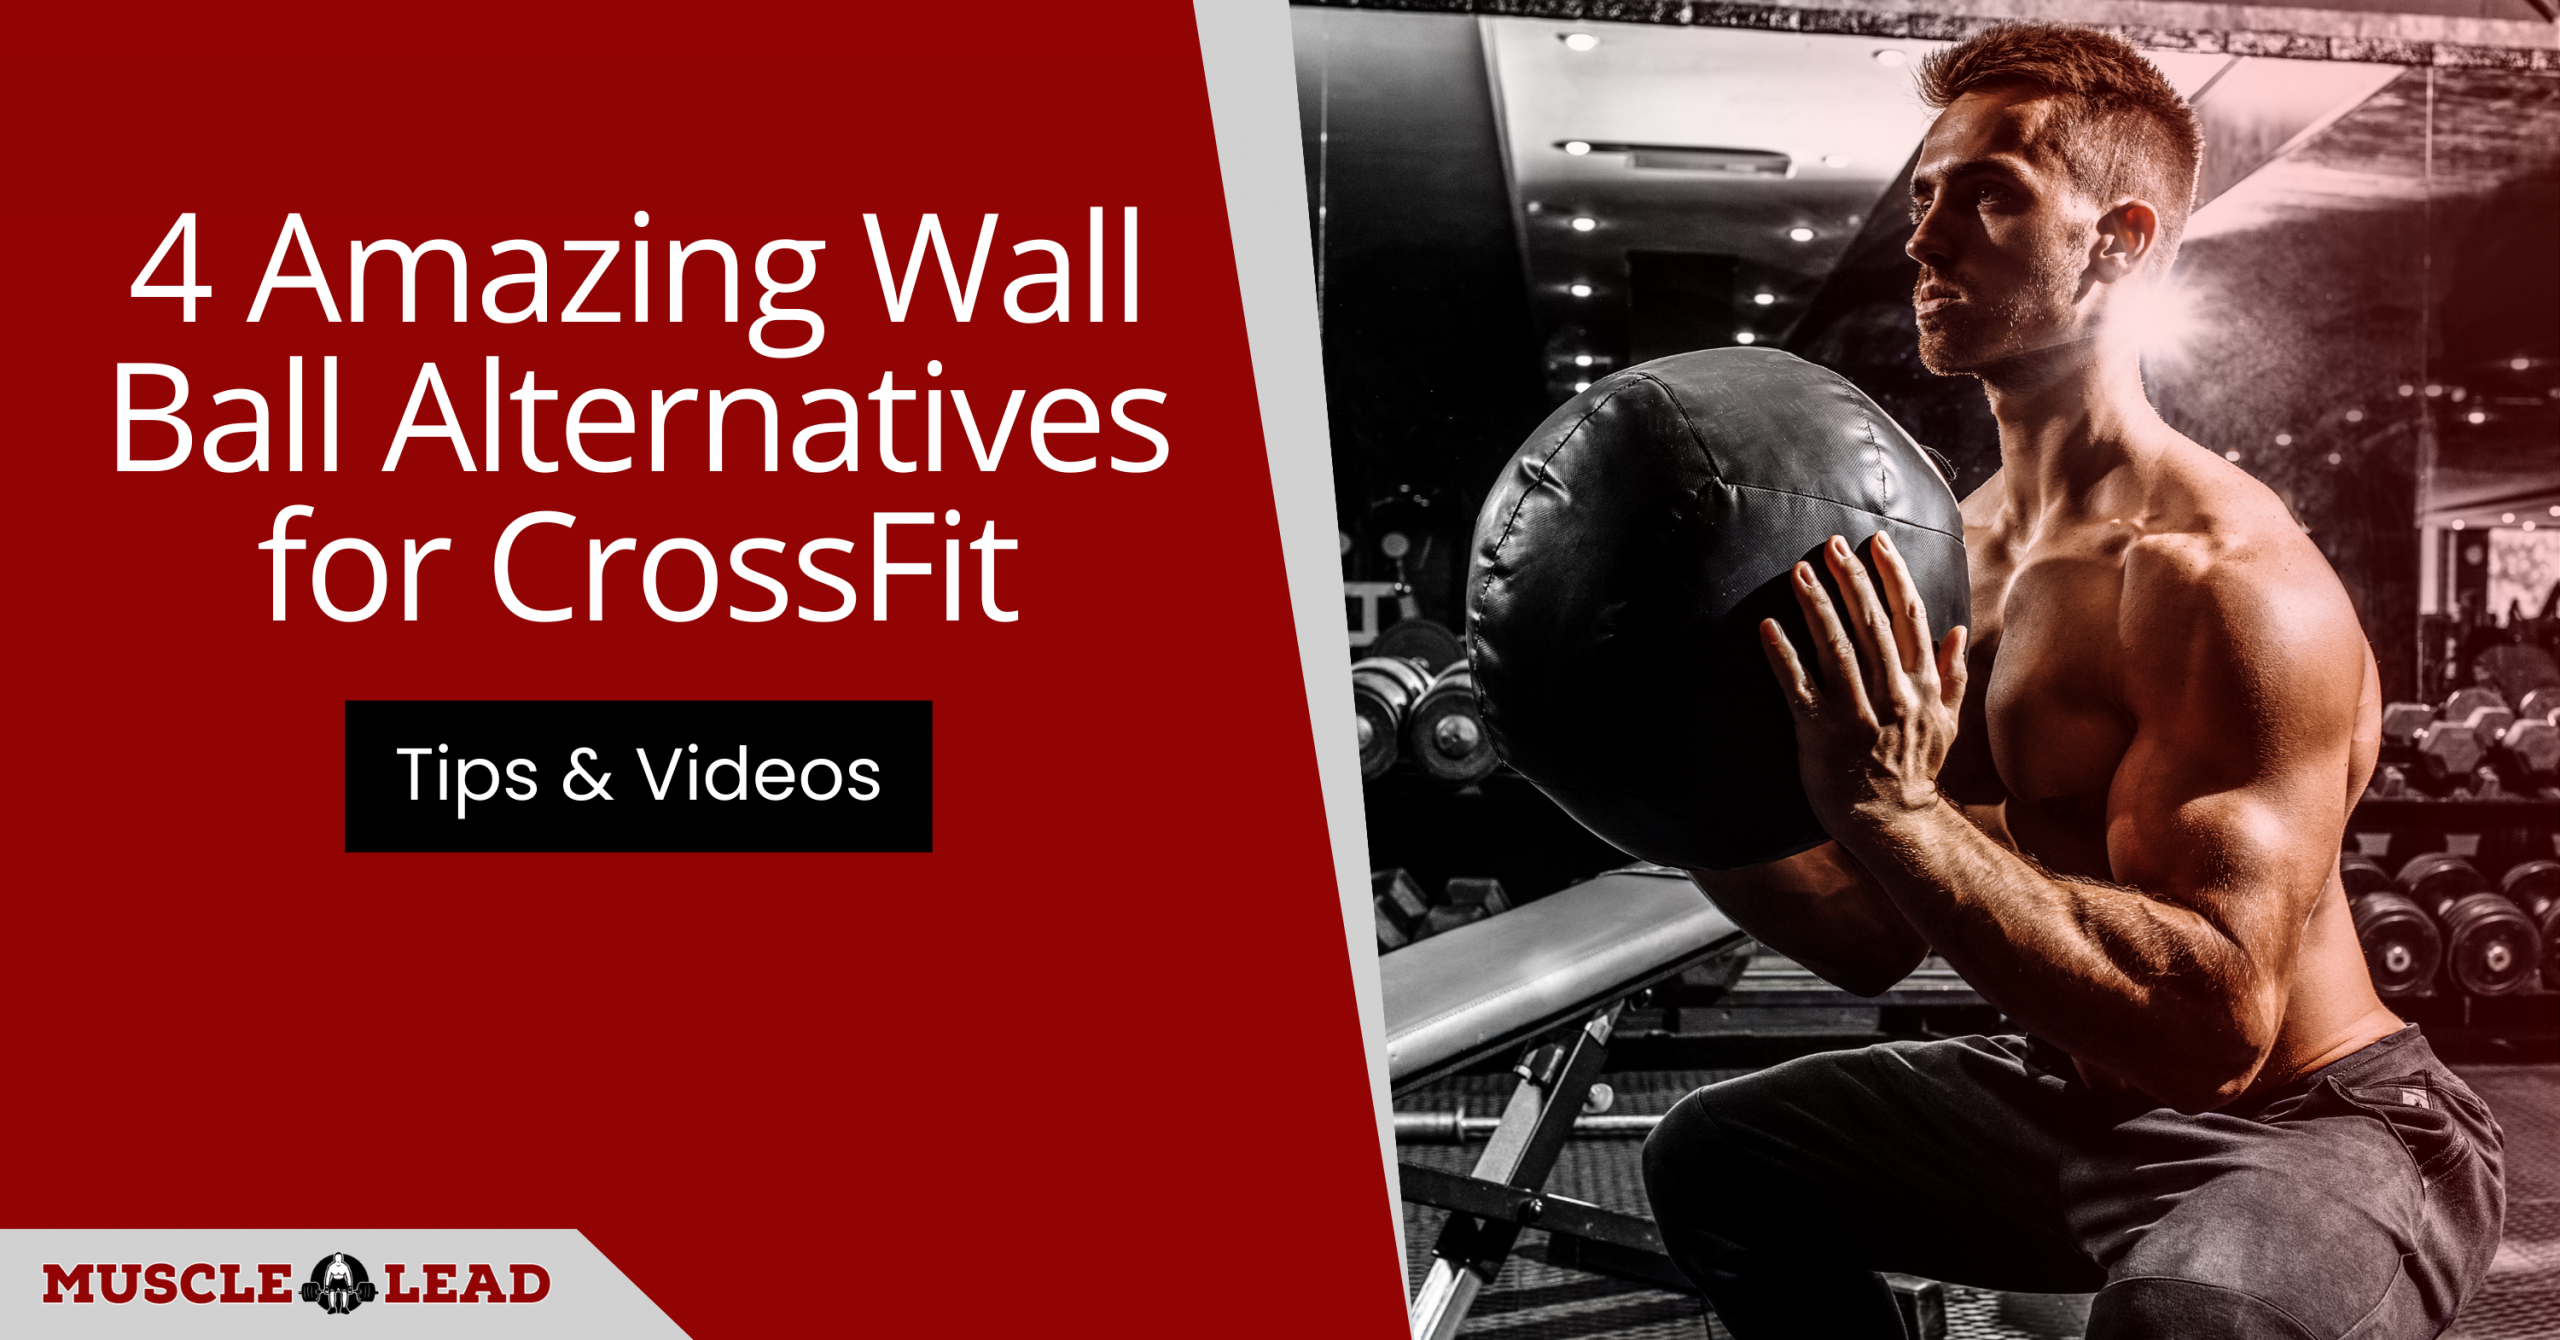 4 Amazing Wall Ball Alternatives for CrossFit: Tips & Videos